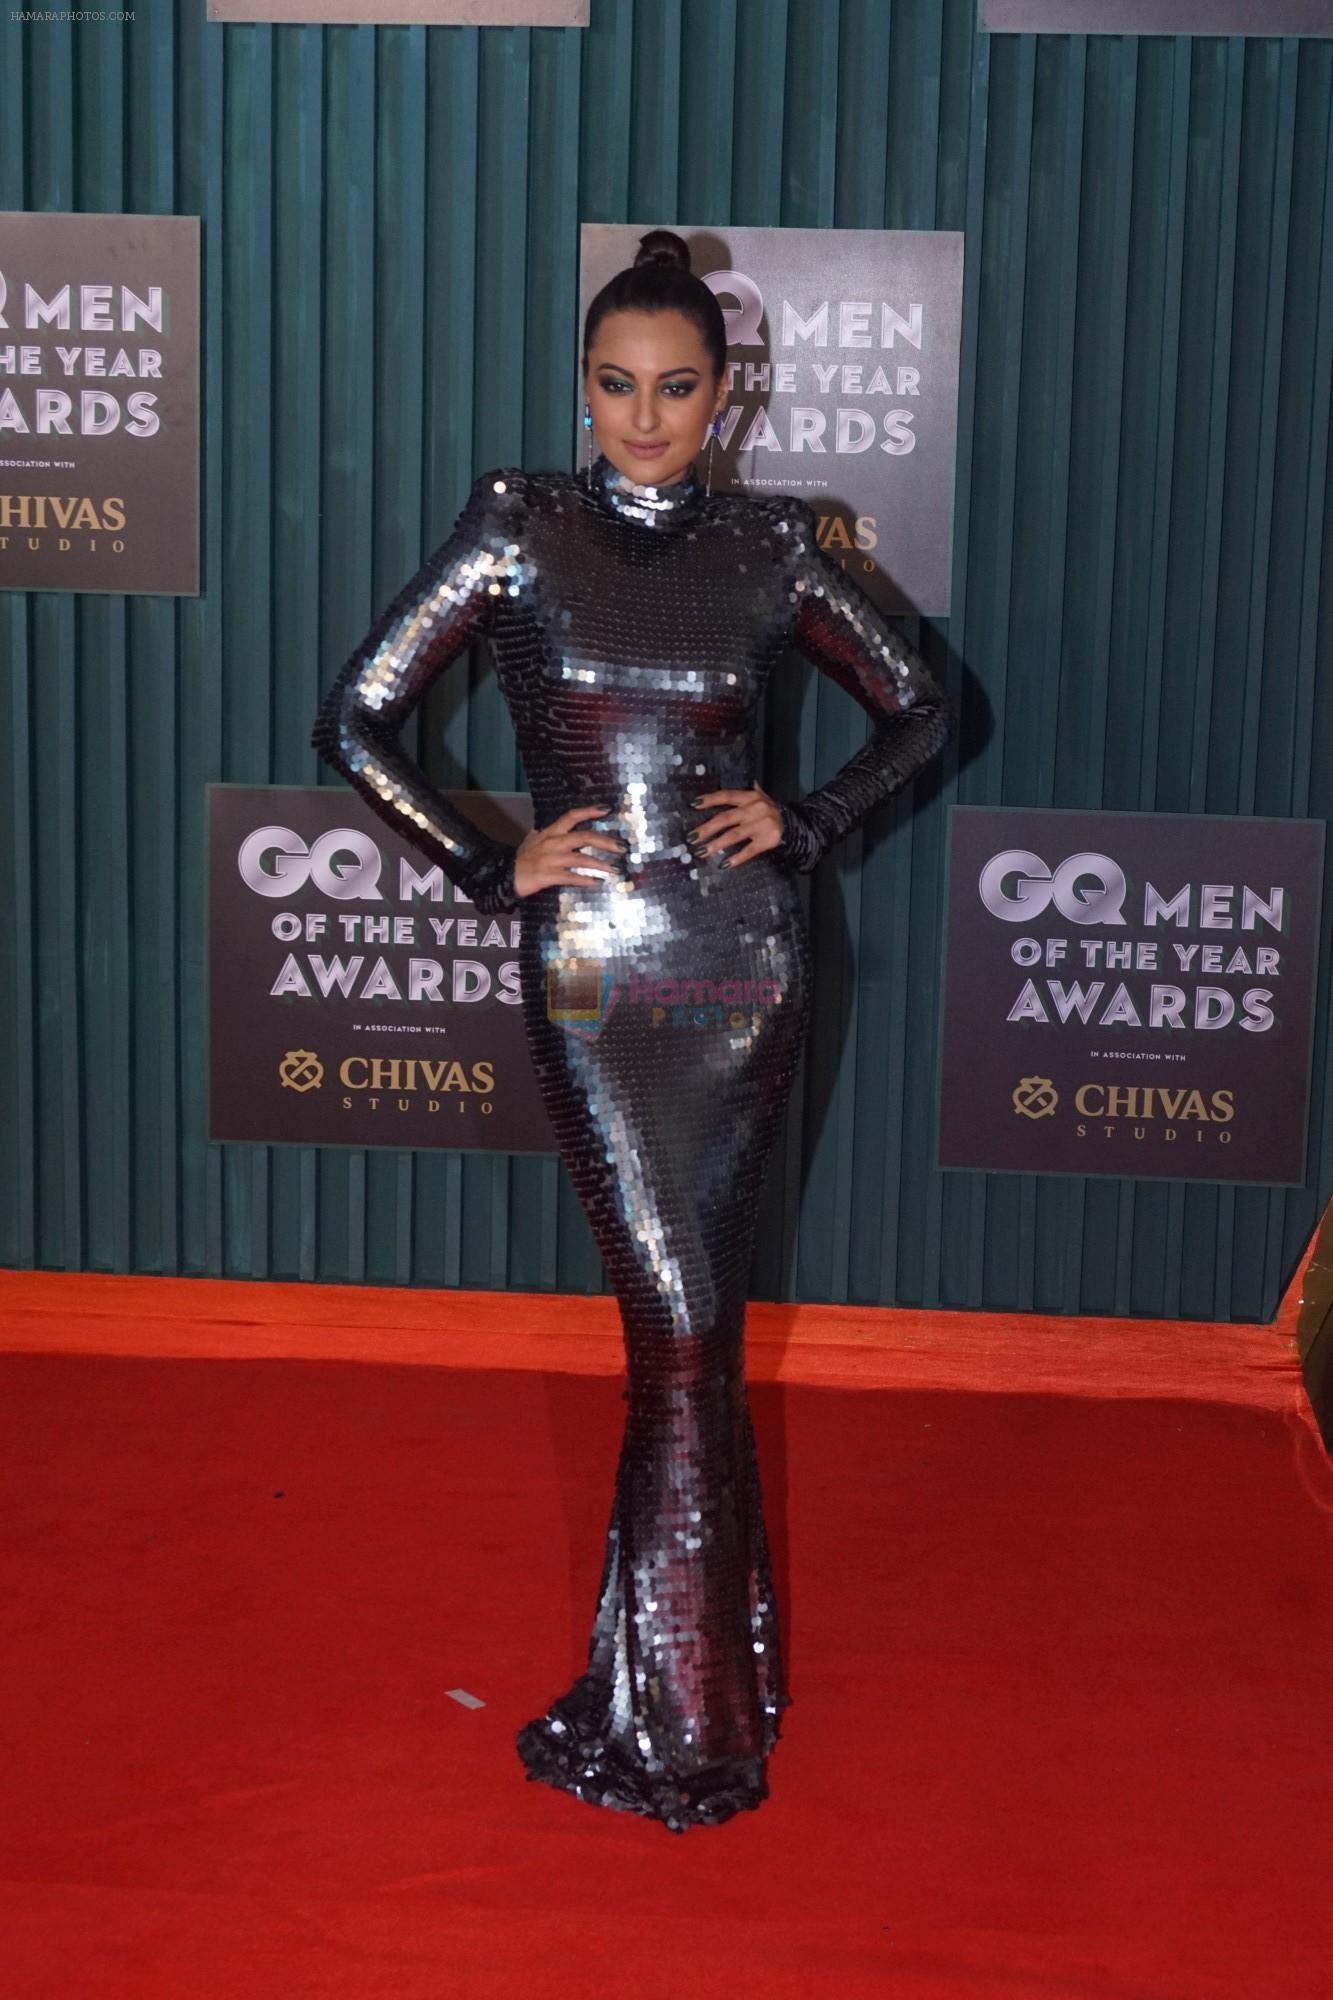 Sonakshi Sinha at GQ Men of the Year Awards 2018 on 27th Sept 2018